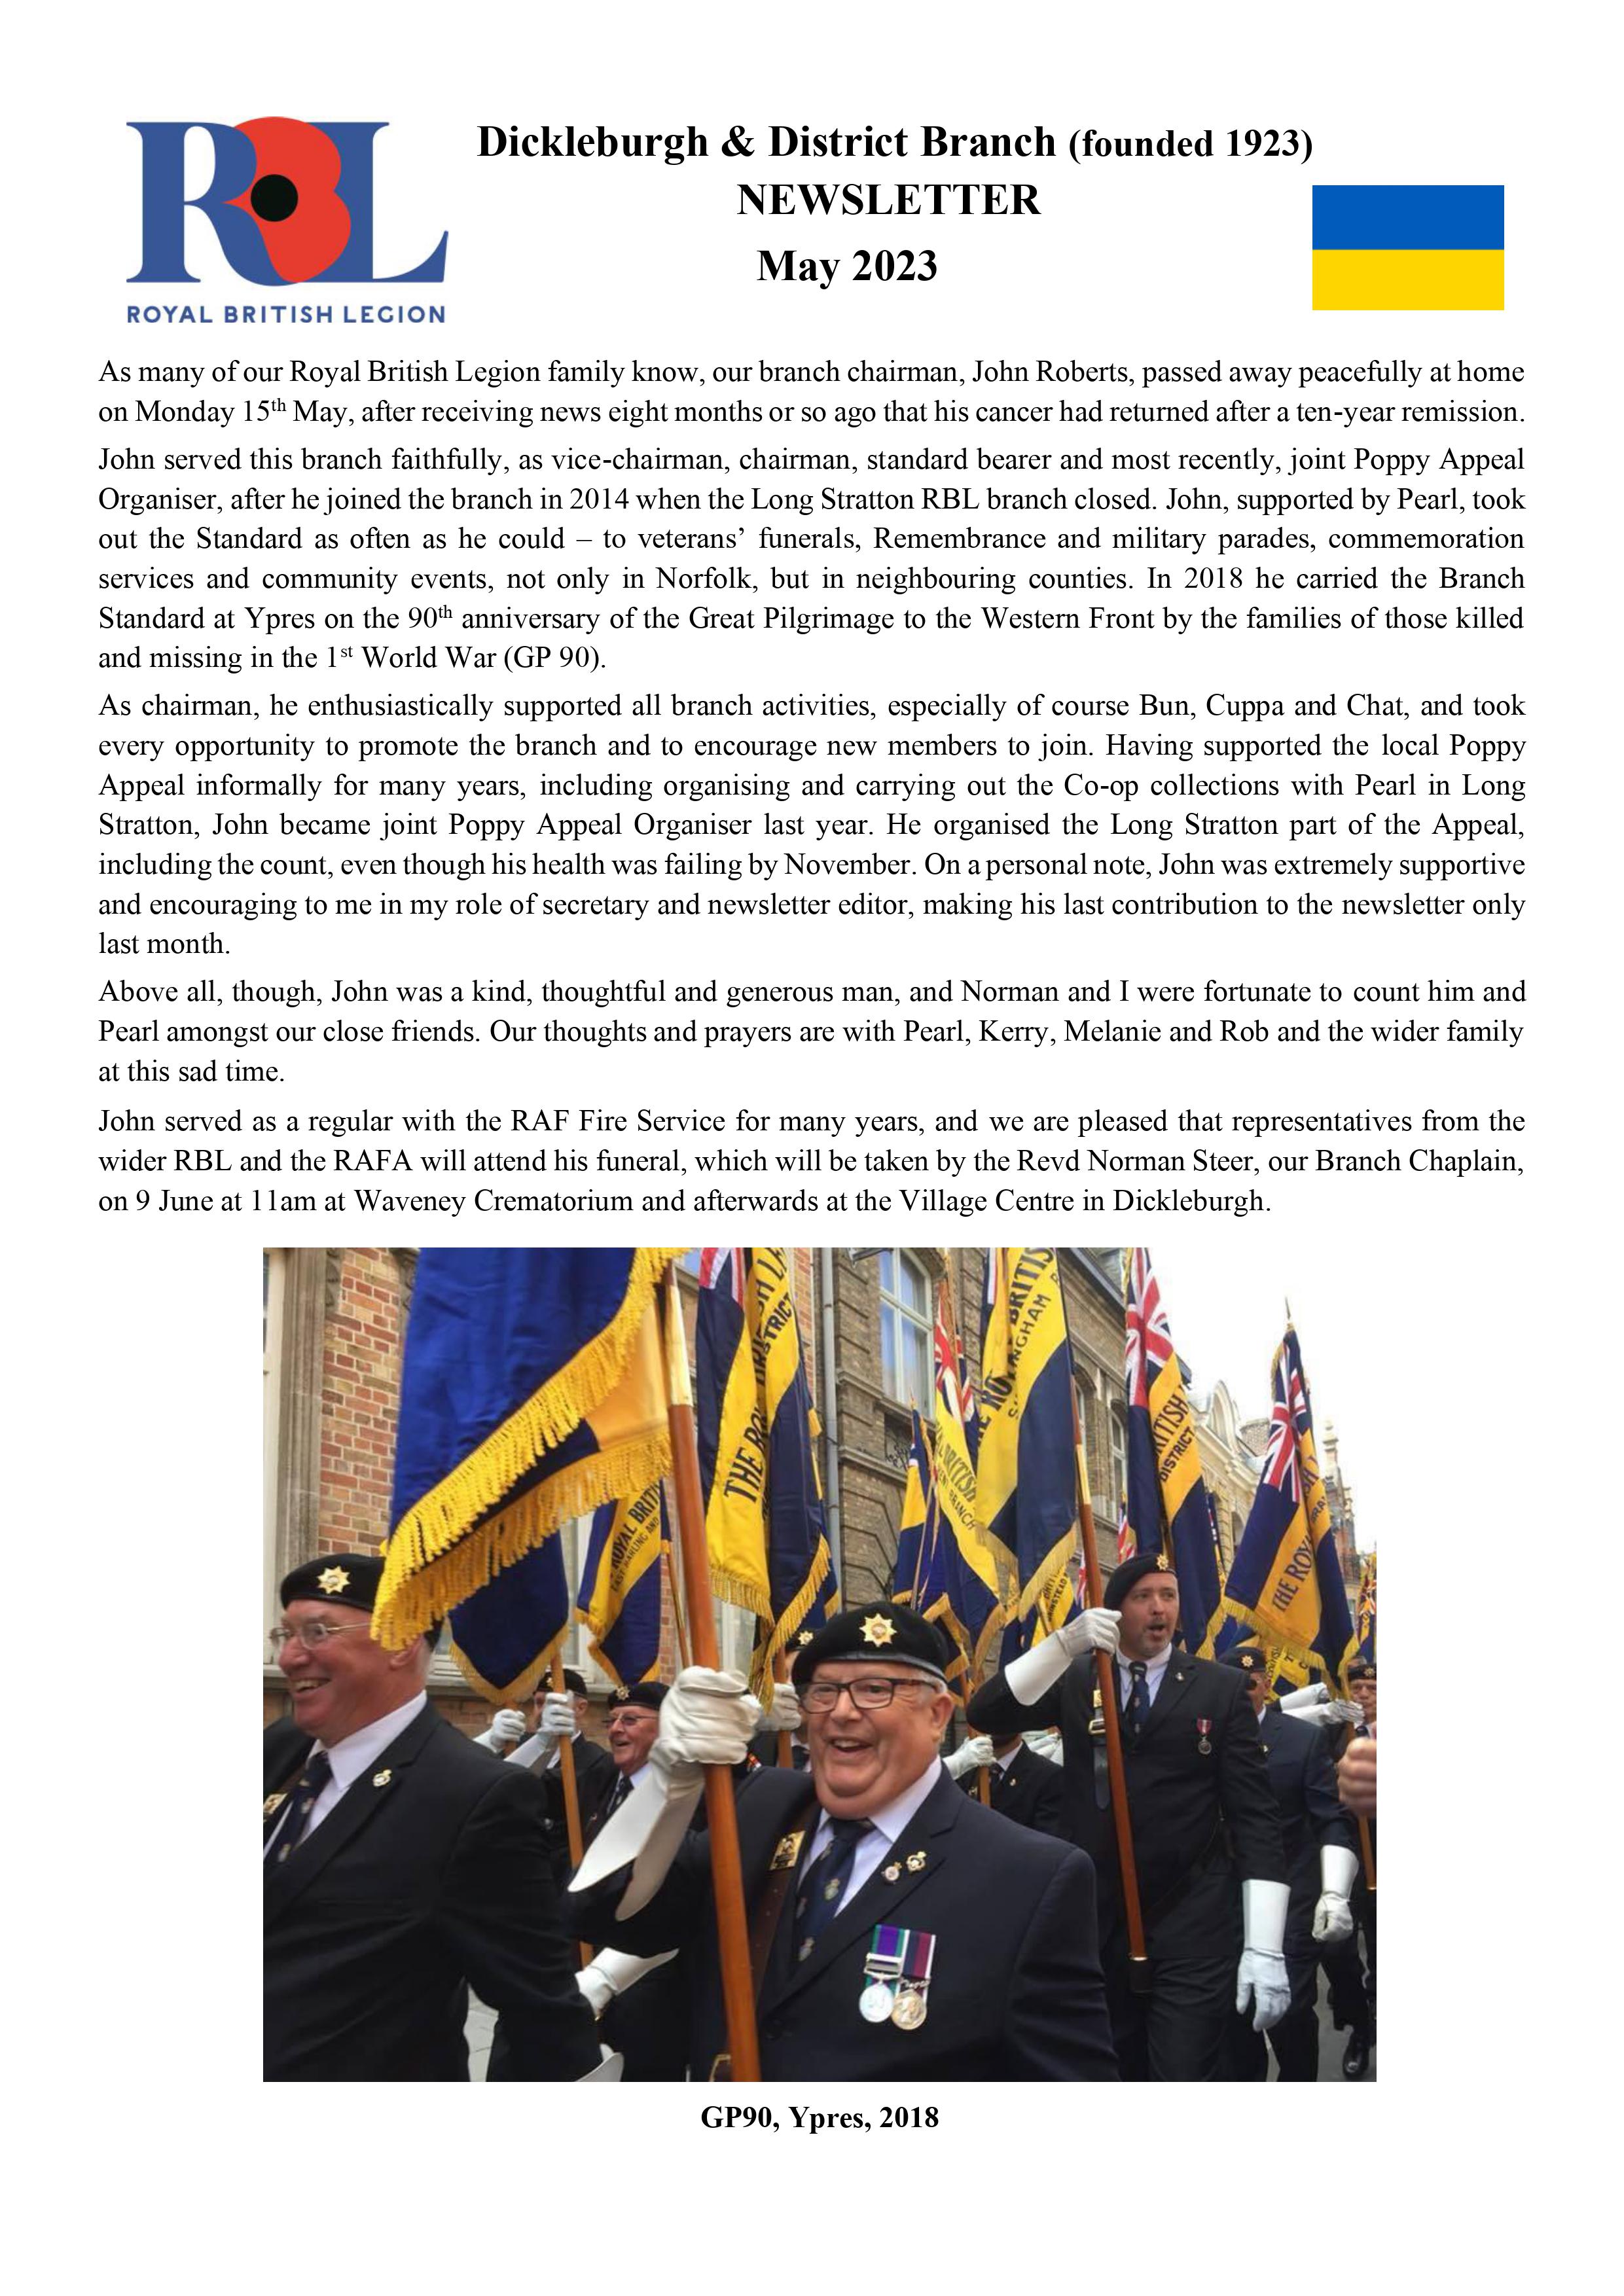 RBL Dickleburgh and District News Letter Page 1